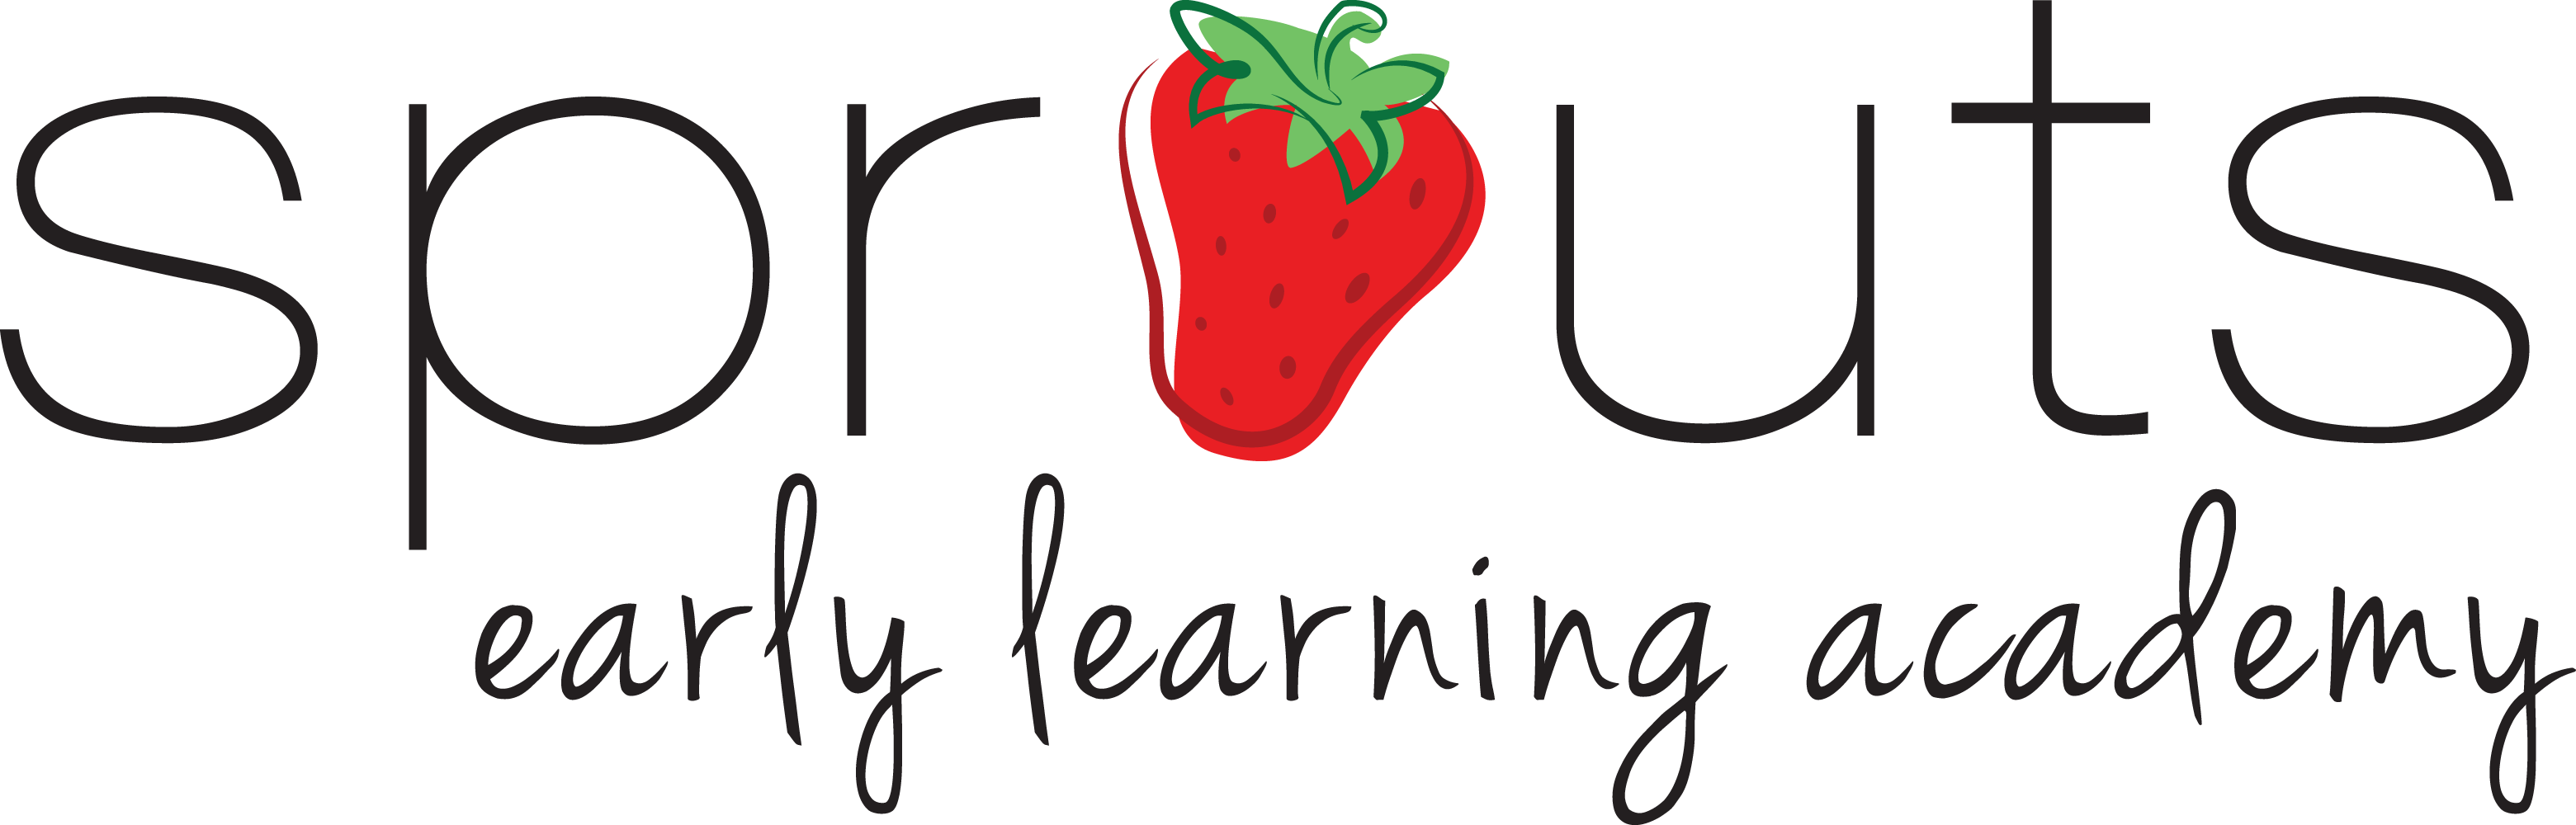 Sprouts Early Learning Academy Logo